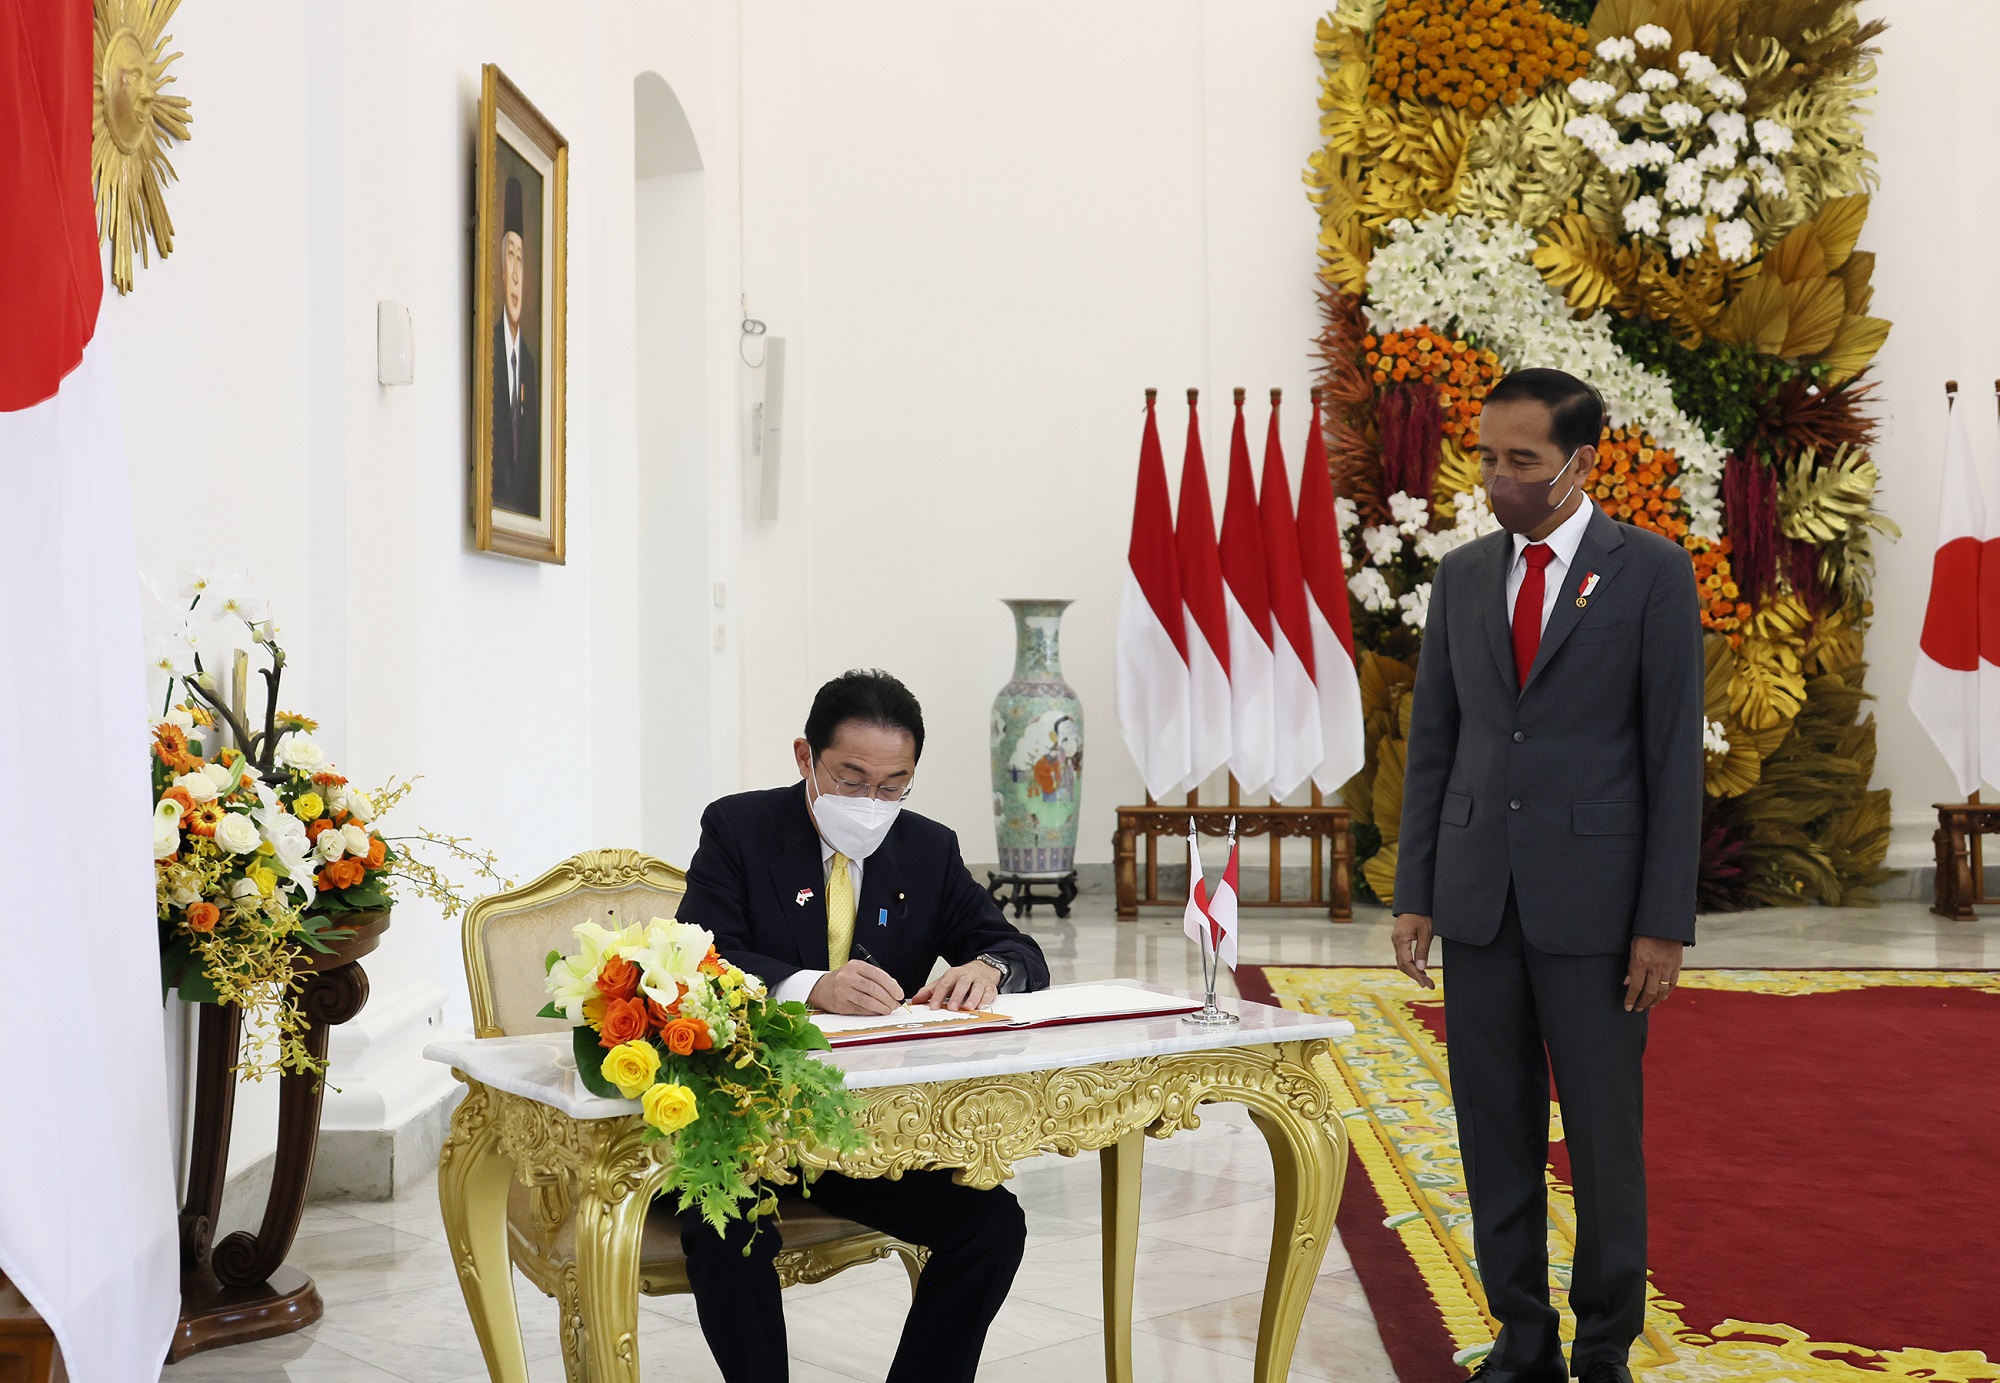 Photograph of the Prime Minister signing a visitors' book